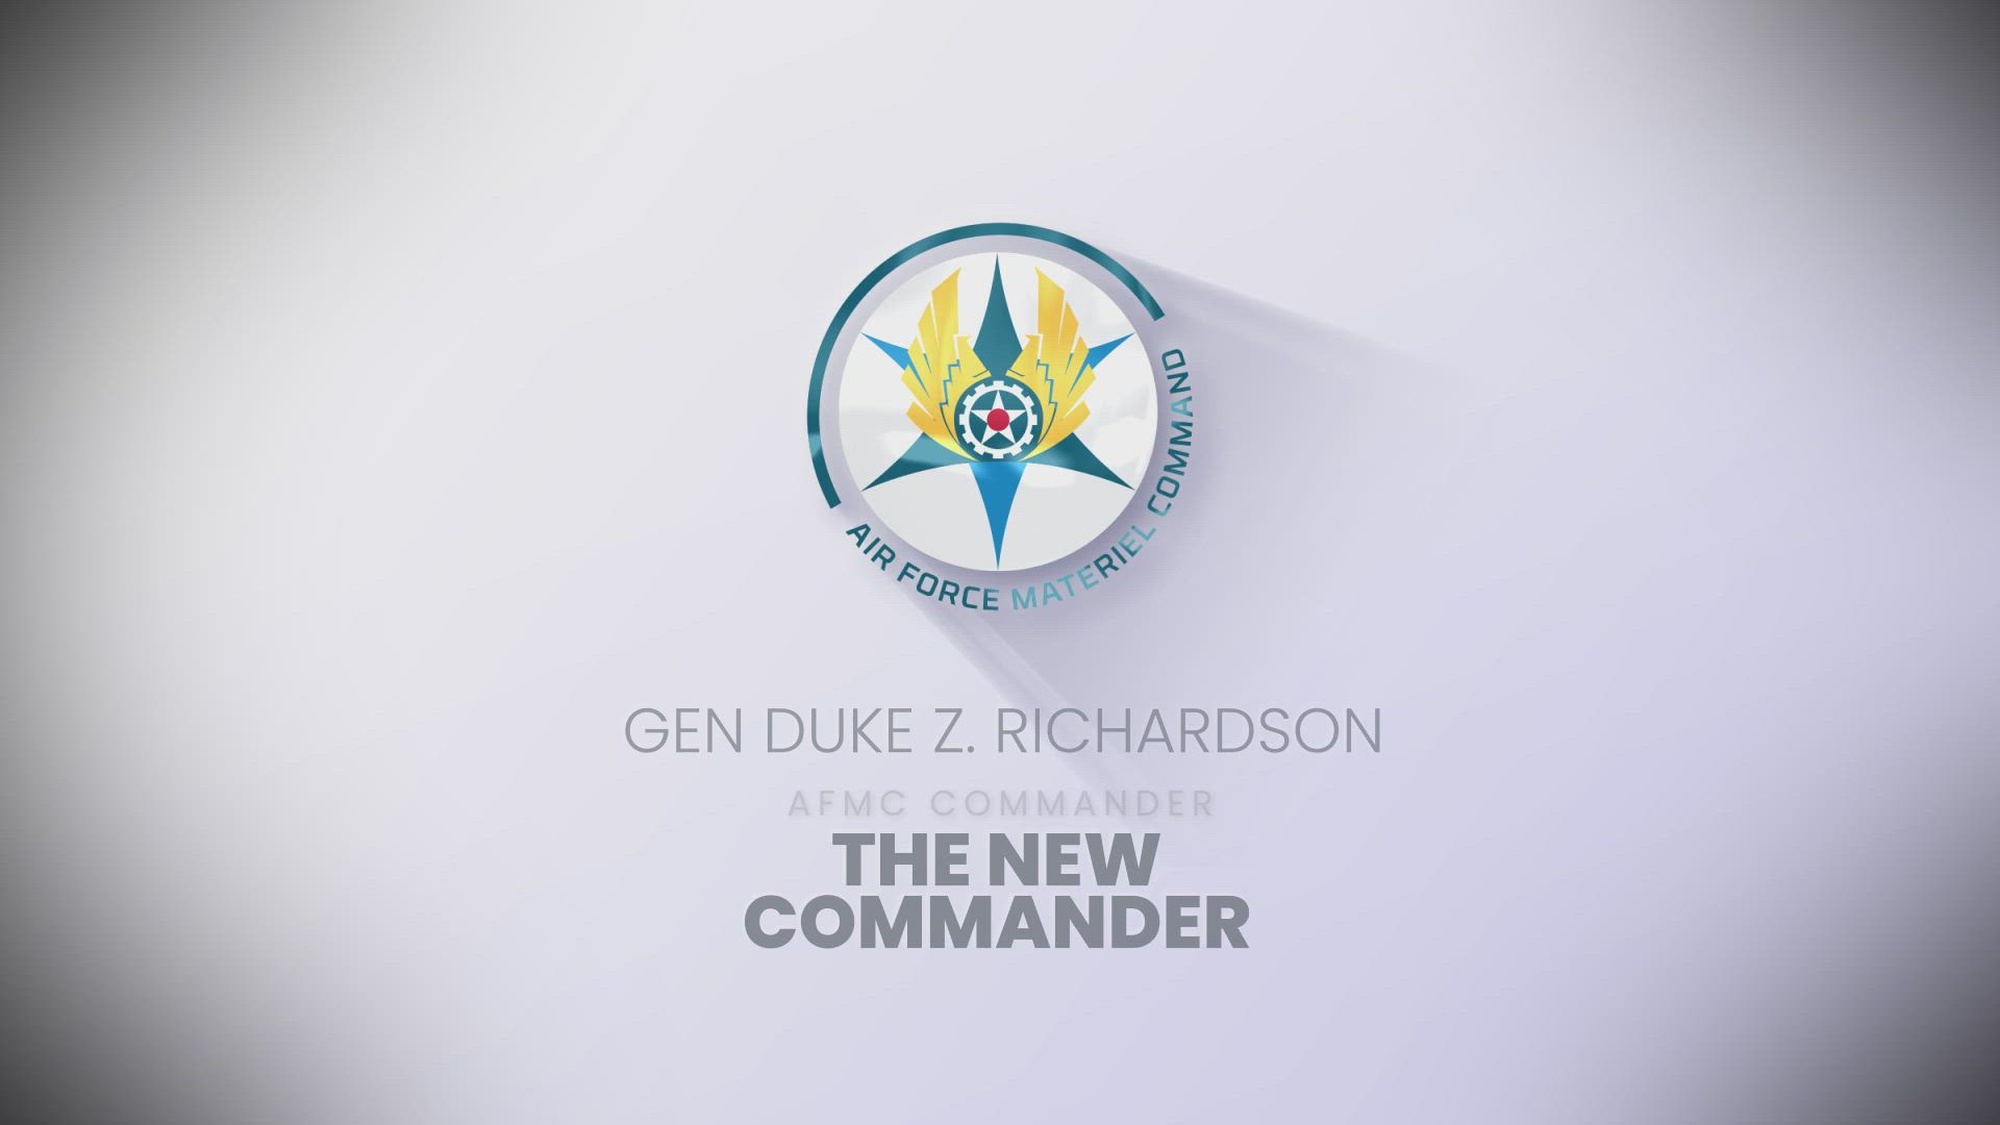 Gen. Duke Z. Richardson took command of the Air Force Materiel Command on June 13, 2022. In this video, we hear from Richardson on leadership, the command and what it means to serve.